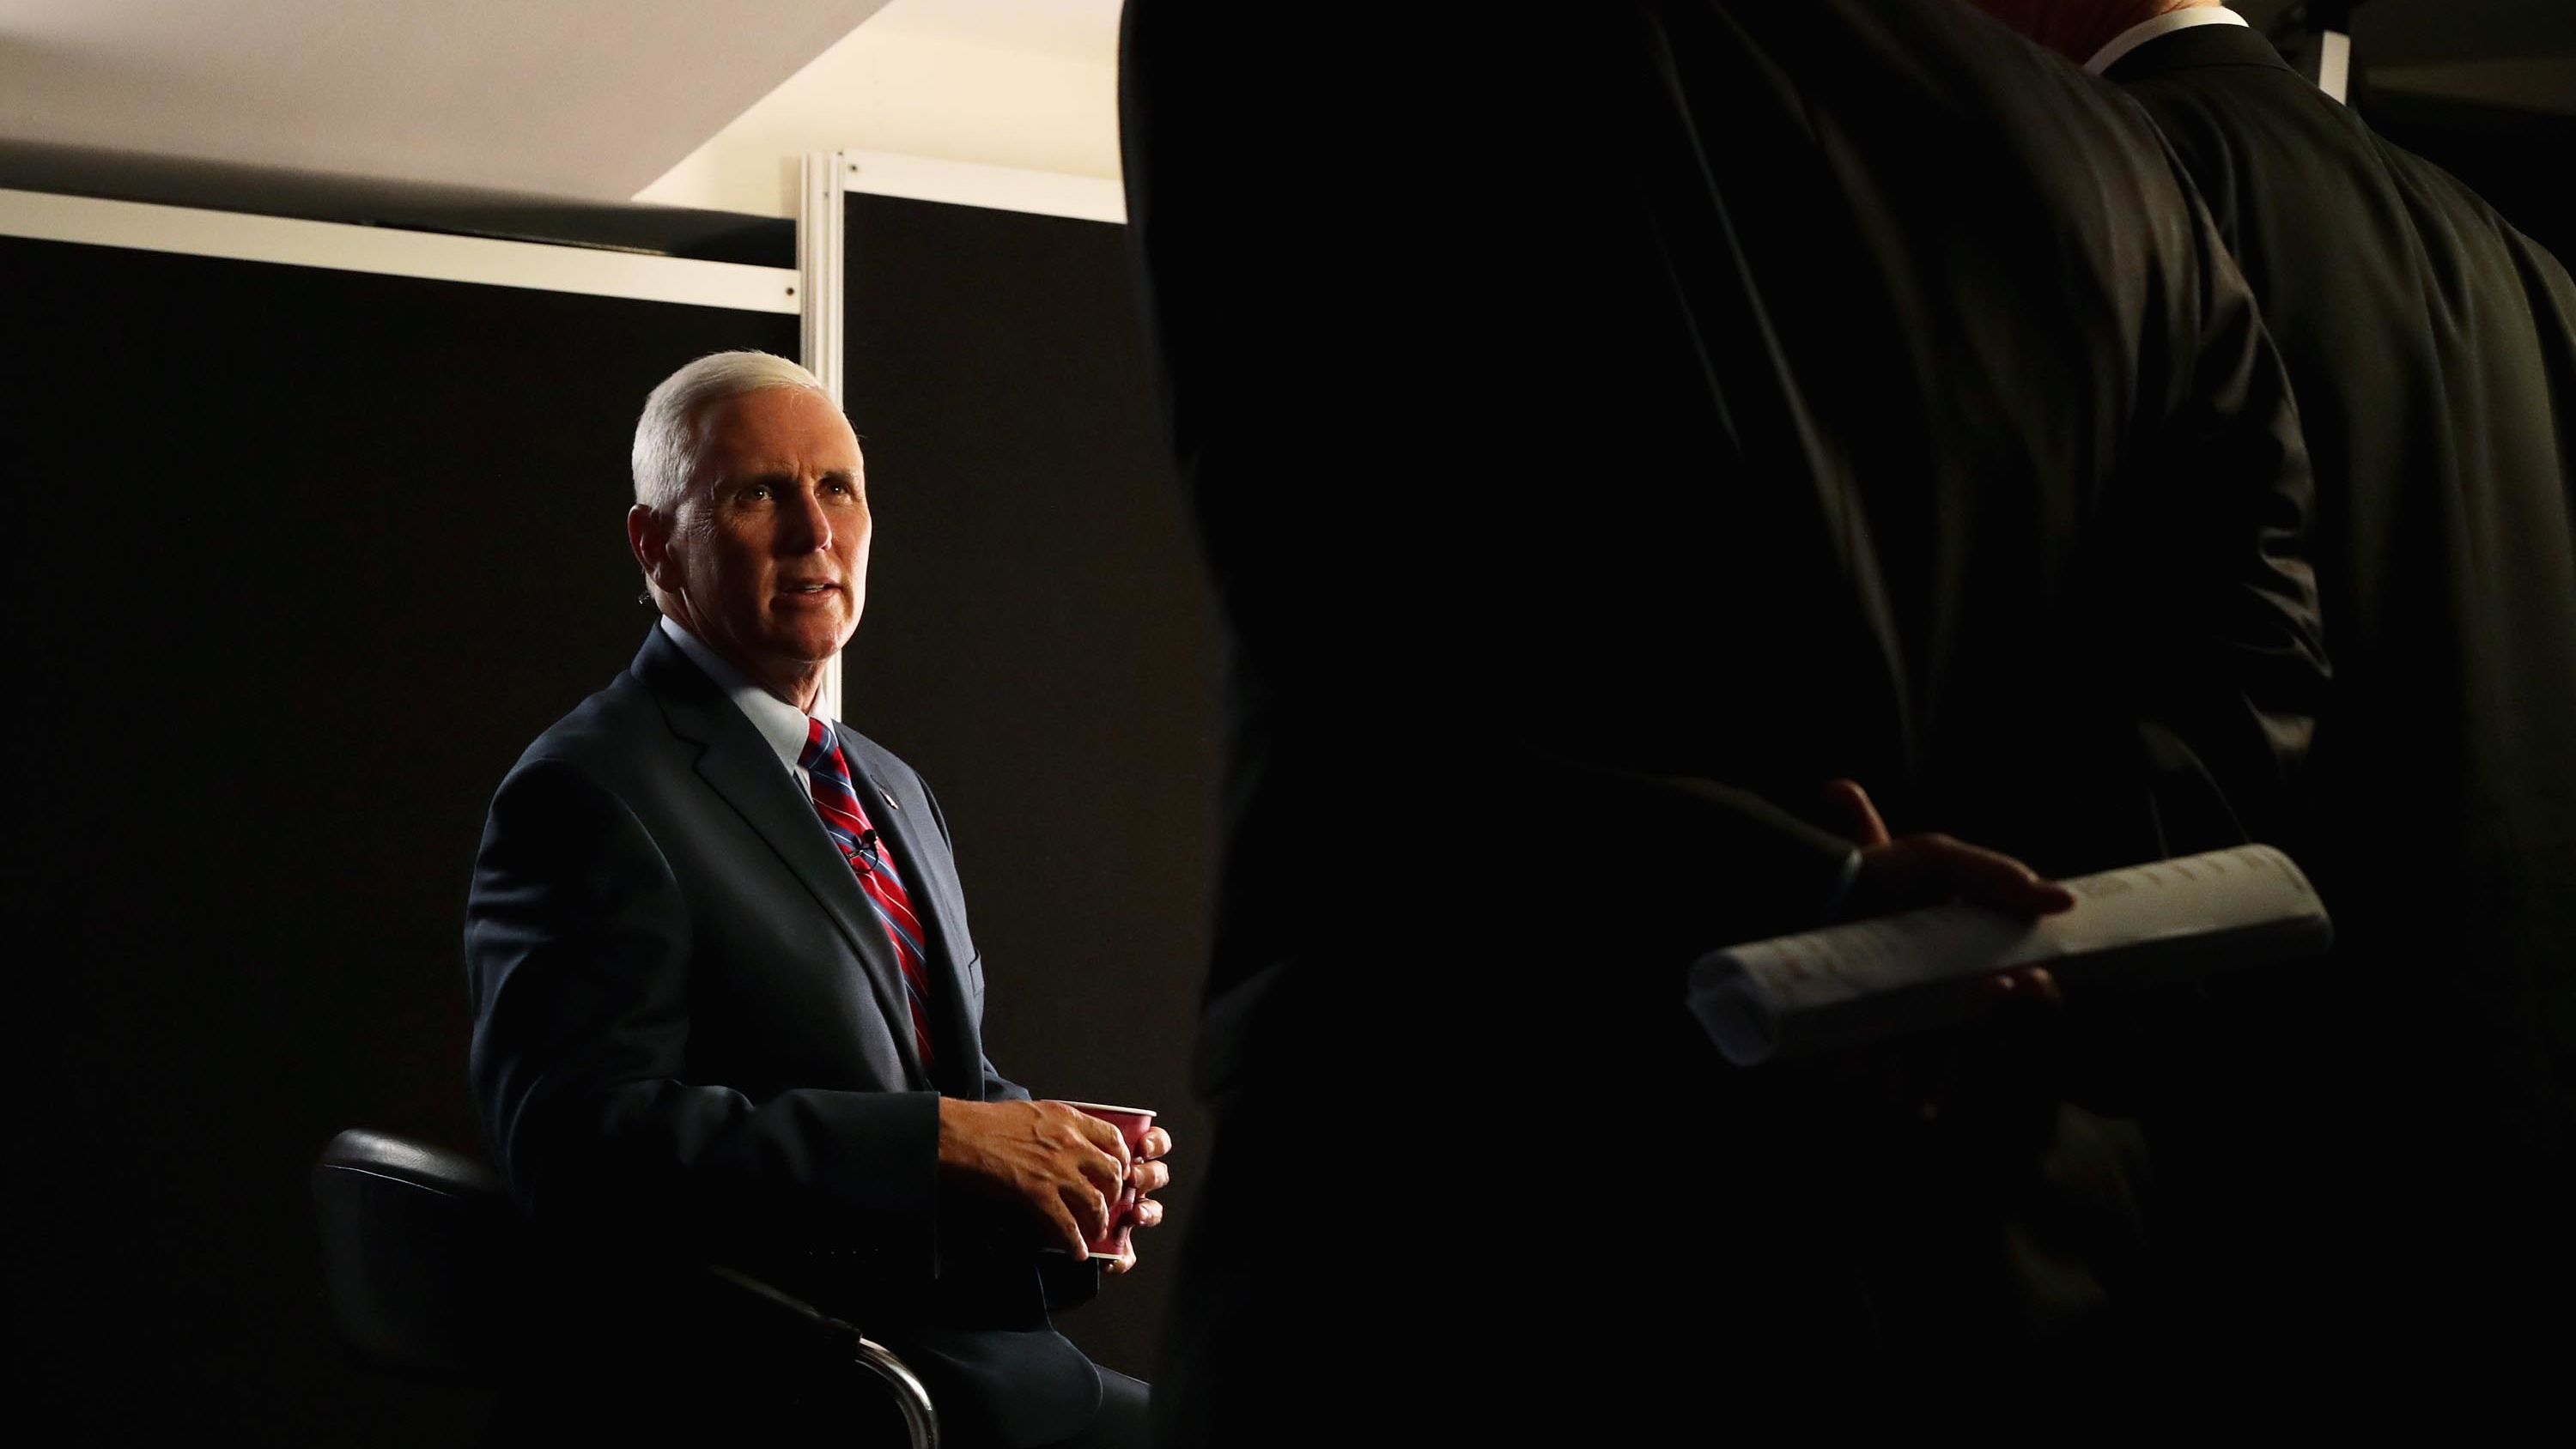 Pence prepares for an interview prior to the start of the fourth day of the Republican National Convention in July 2016.